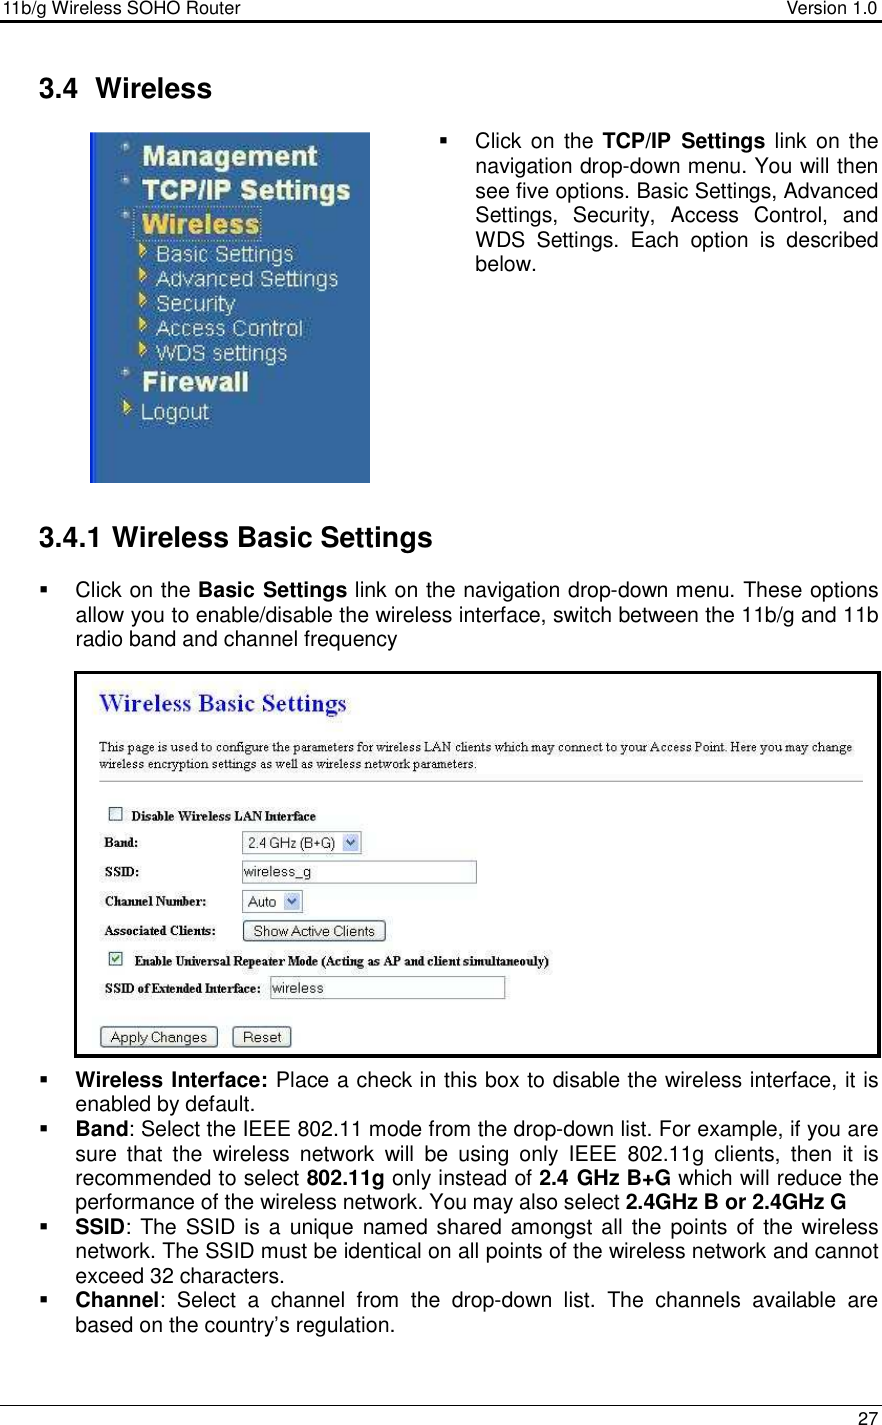 11b/g Wireless SOHO Router                                     Version 1.0    27   3.4  Wireless   Click on  the  TCP/IP  Settings  link on the navigation drop-down menu. You will then see five options. Basic Settings, Advanced Settings,  Security,  Access  Control,  and WDS  Settings.  Each  option  is  described below.            3.4.1 Wireless Basic Settings   Click on the Basic Settings link on the navigation drop-down menu. These options allow you to enable/disable the wireless interface, switch between the 11b/g and 11b radio band and channel frequency                   Wireless Interface: Place a check in this box to disable the wireless interface, it is enabled by default.   Band: Select the IEEE 802.11 mode from the drop-down list. For example, if you are sure  that  the  wireless  network  will  be  using  only  IEEE  802.11g  clients,  then  it  is recommended to select 802.11g only instead of 2.4 GHz B+G which will reduce the performance of the wireless network. You may also select 2.4GHz B or 2.4GHz G  SSID: The  SSID is a  unique named shared  amongst all  the  points of the wireless network. The SSID must be identical on all points of the wireless network and cannot exceed 32 characters.   Channel:  Select  a  channel  from  the  drop-down  list.  The  channels  available  are based on the country’s regulation.   